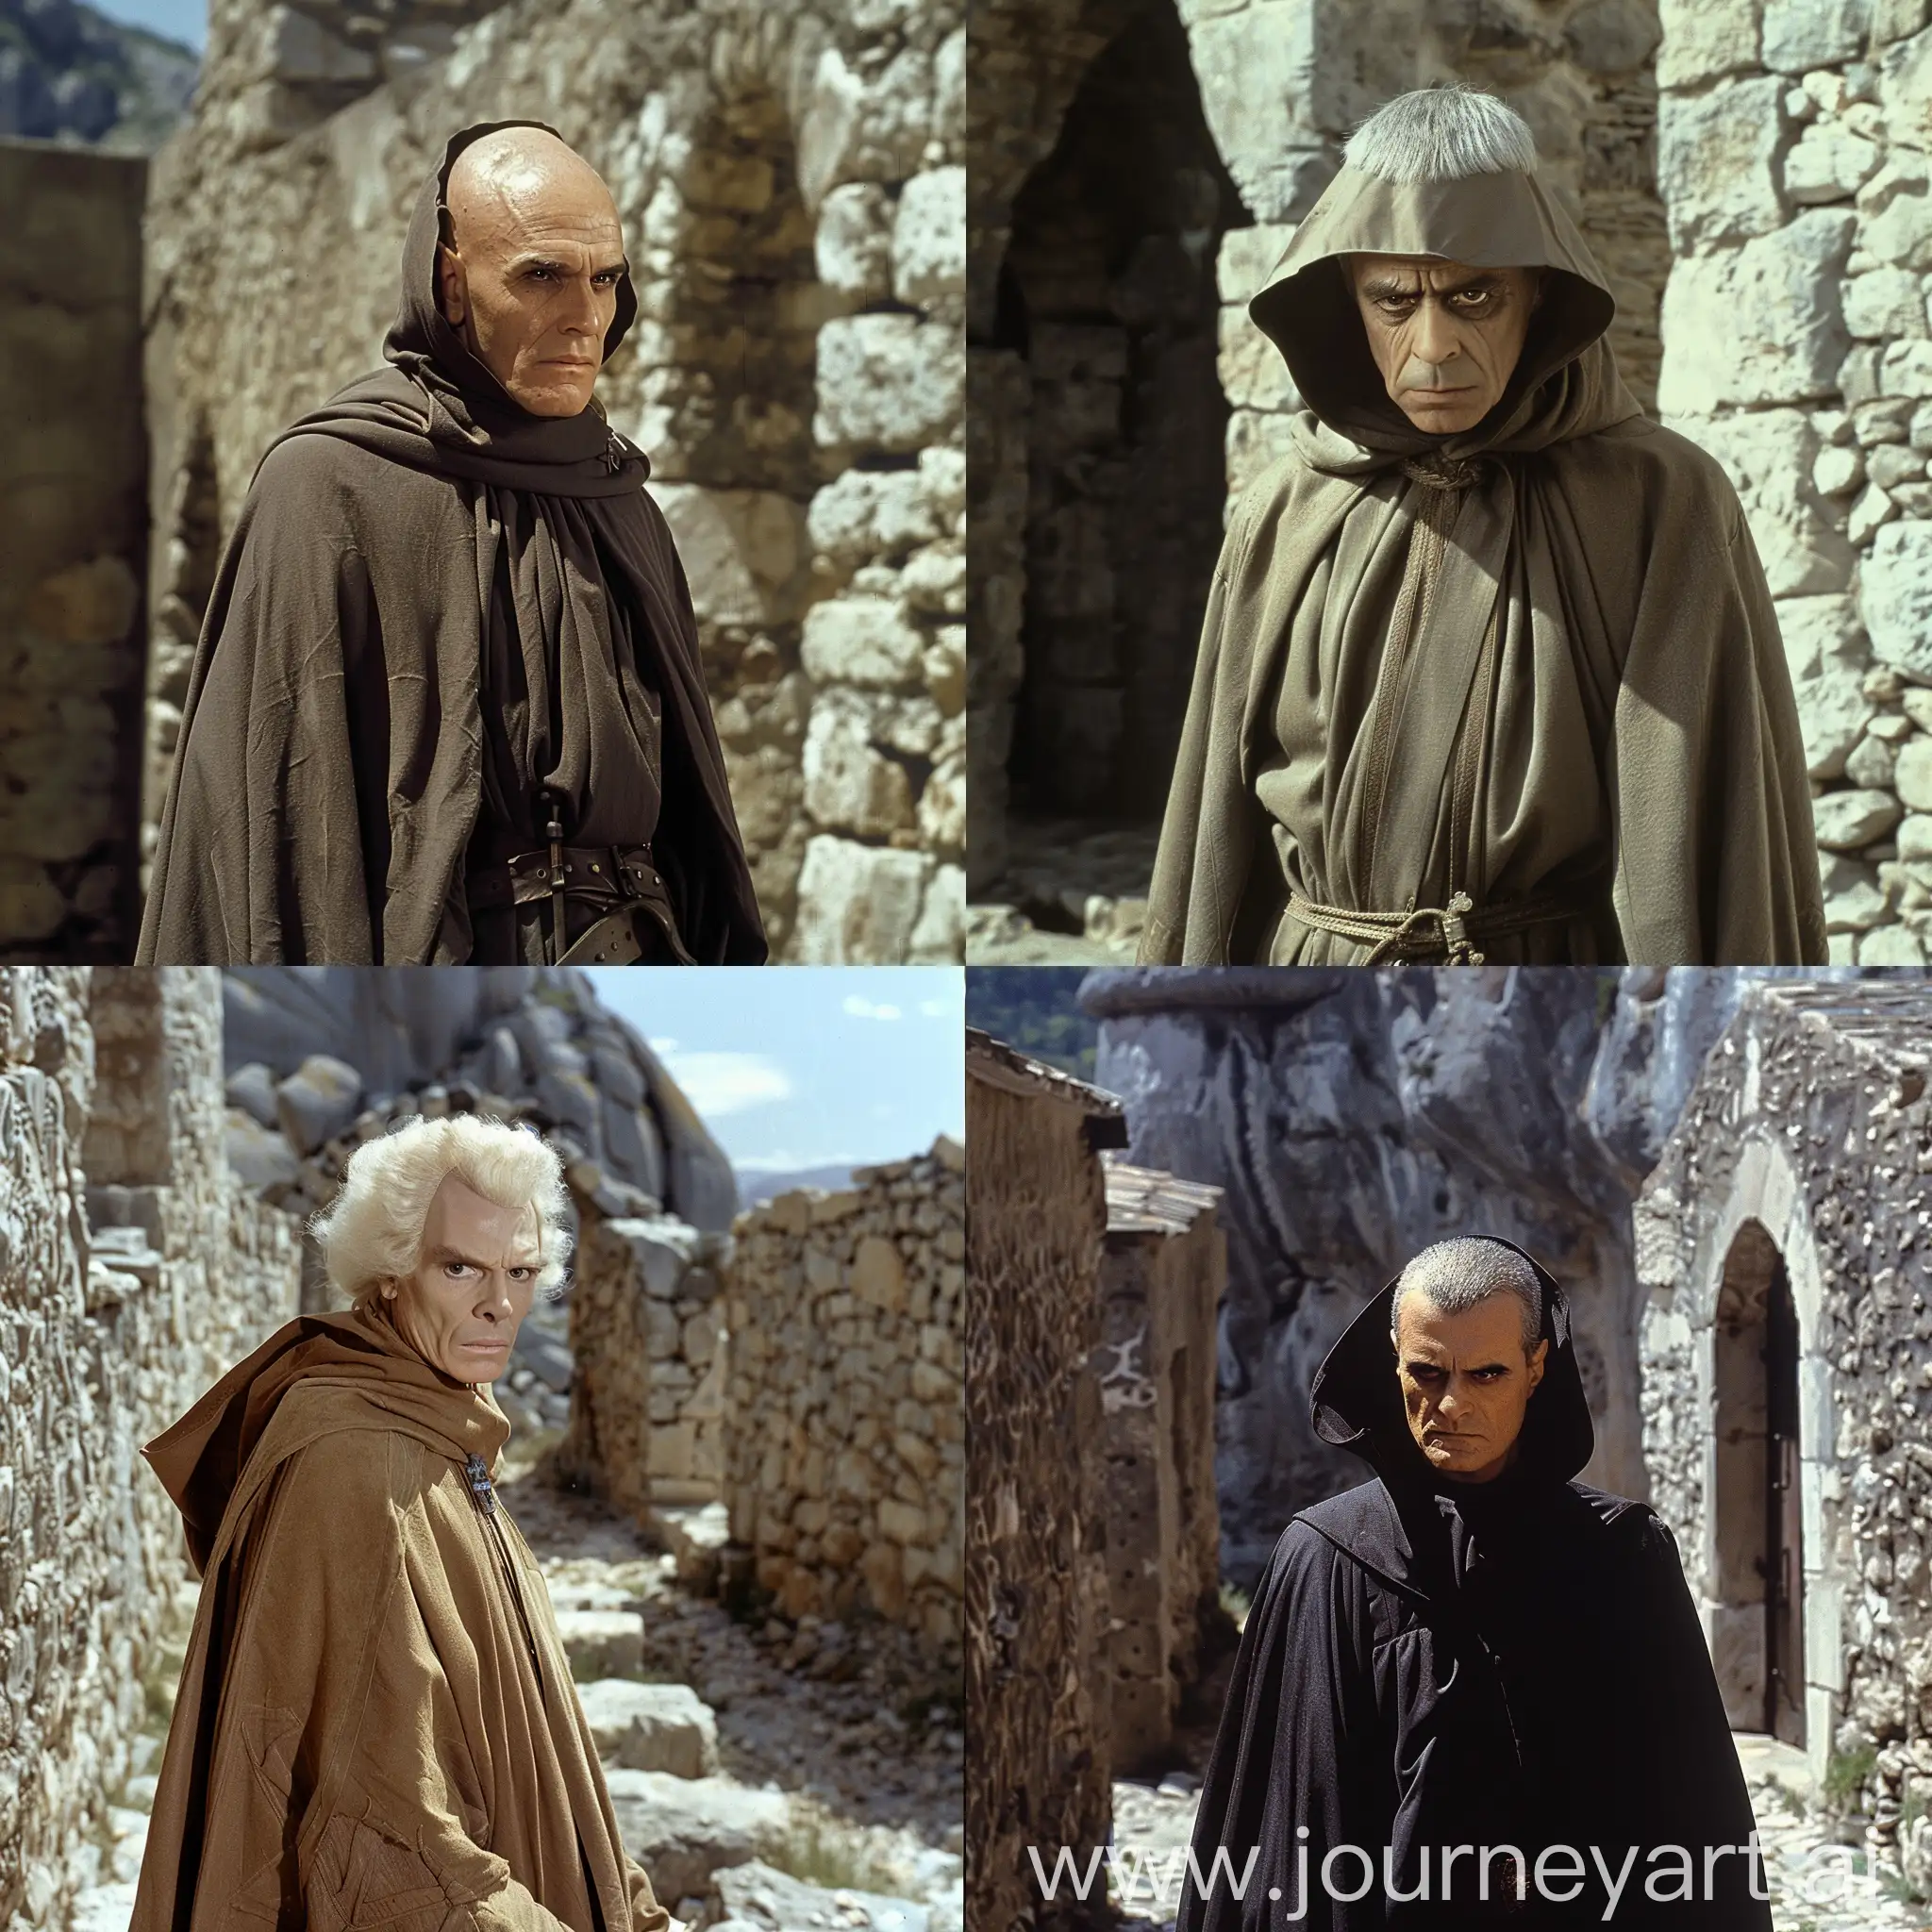 High-Inquisitor-in-Monastic-Robe-Amid-Stone-Walls-1980s-Style